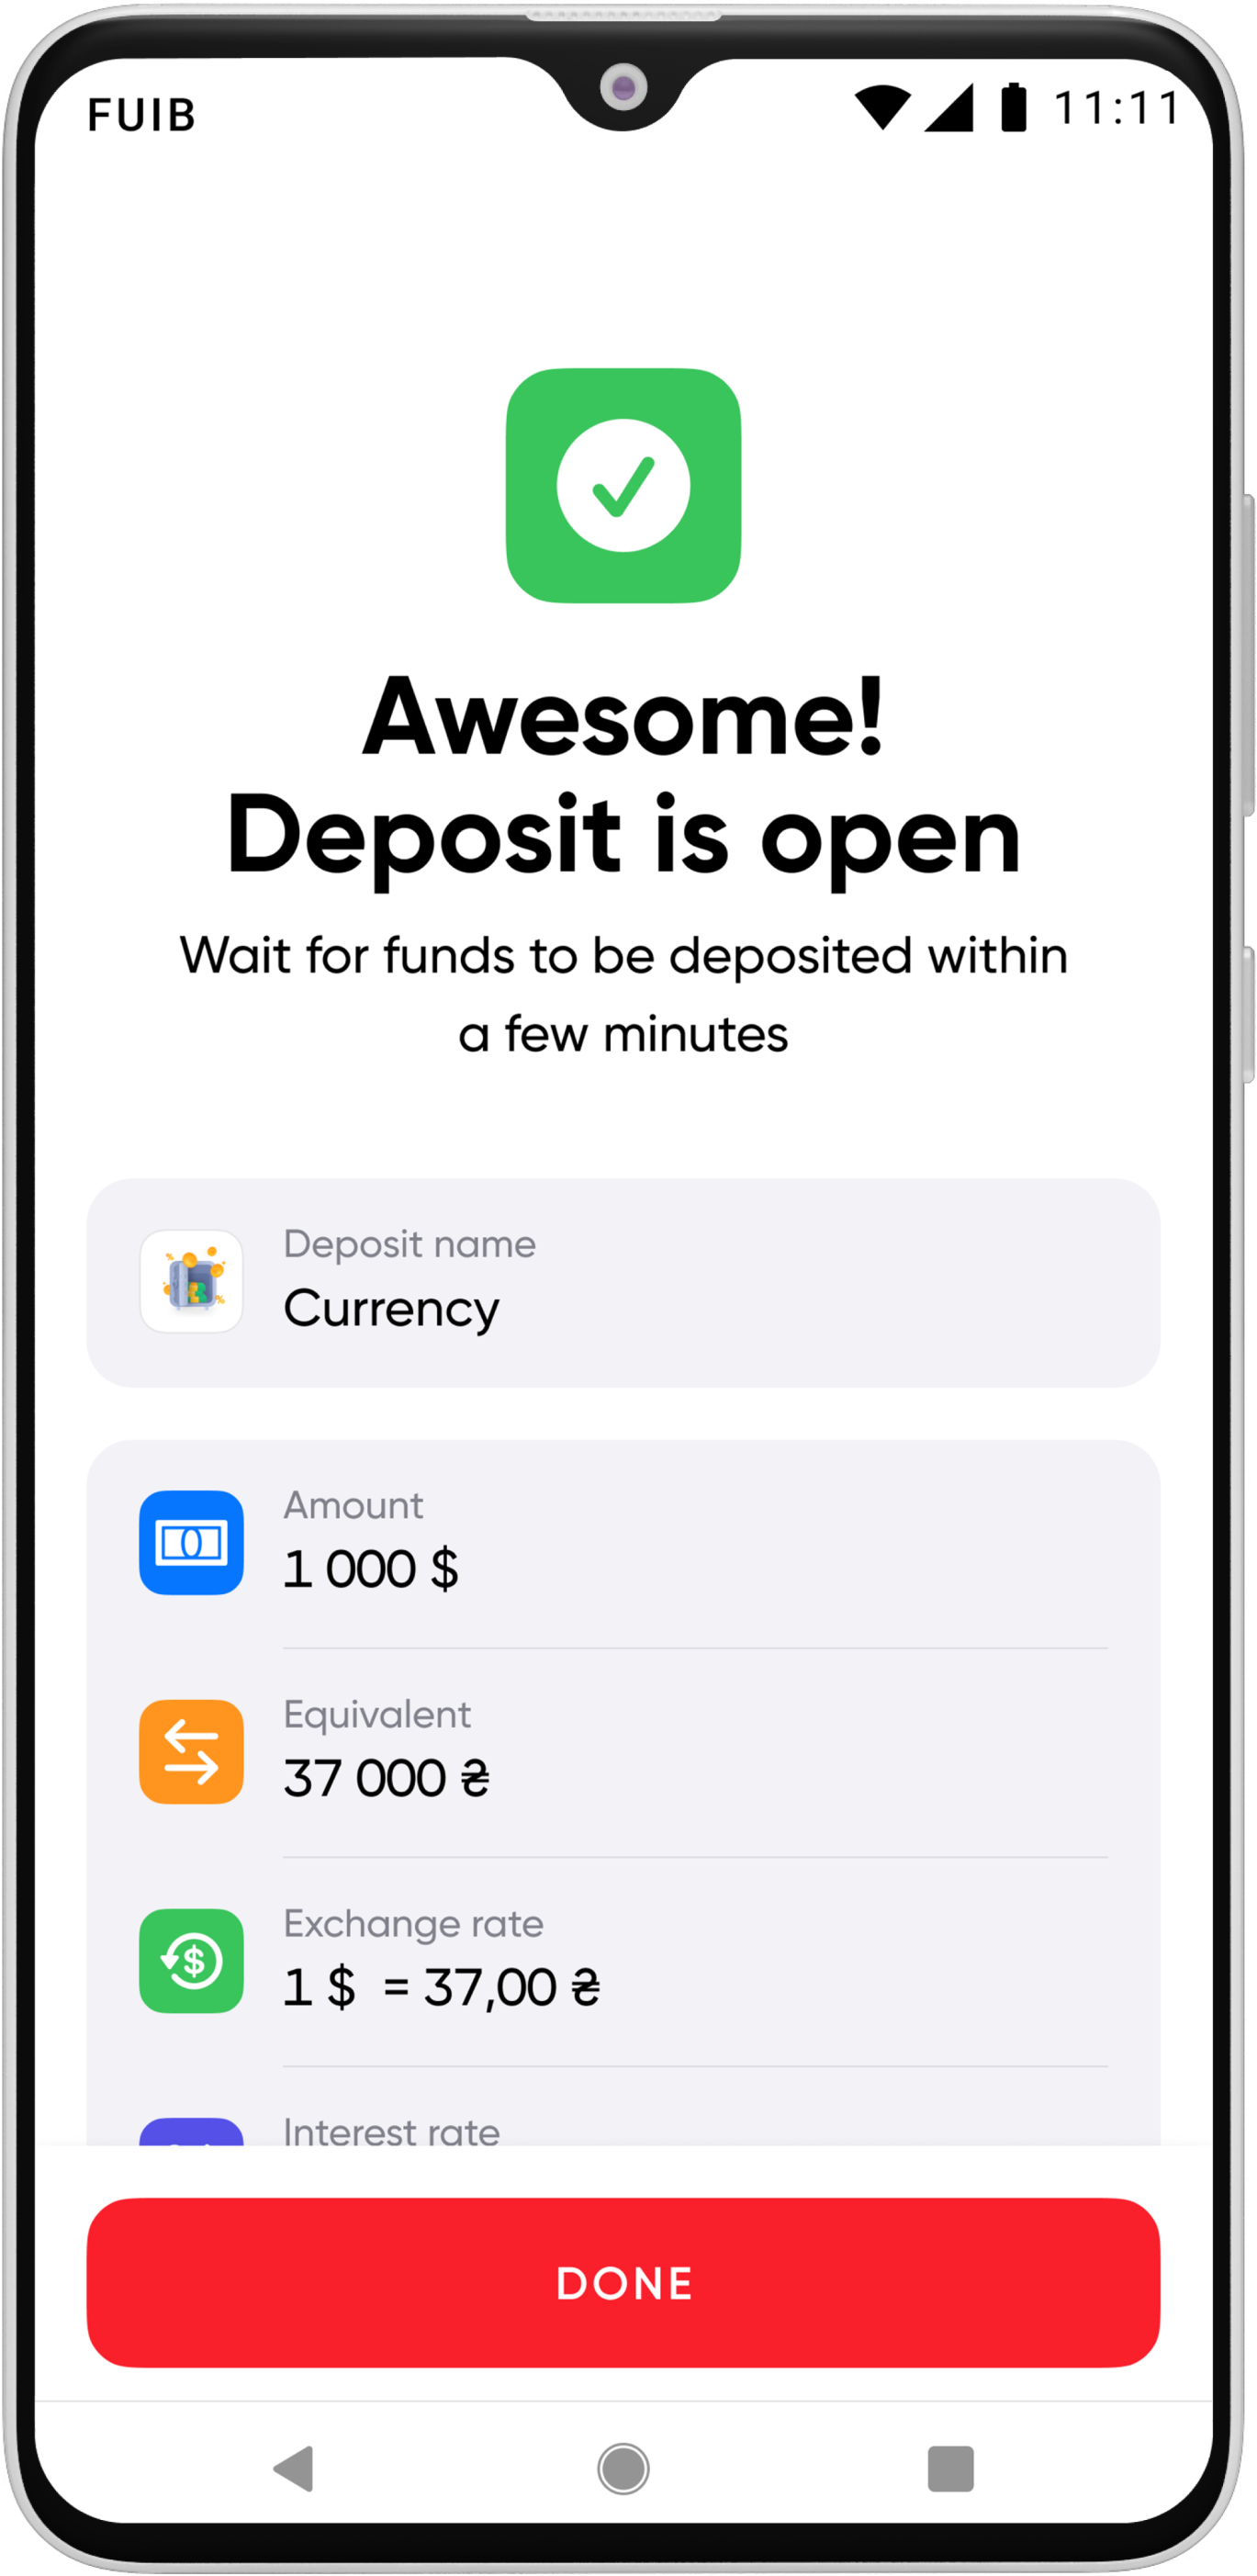 After opening the deposit, you will see a message about the successful opening